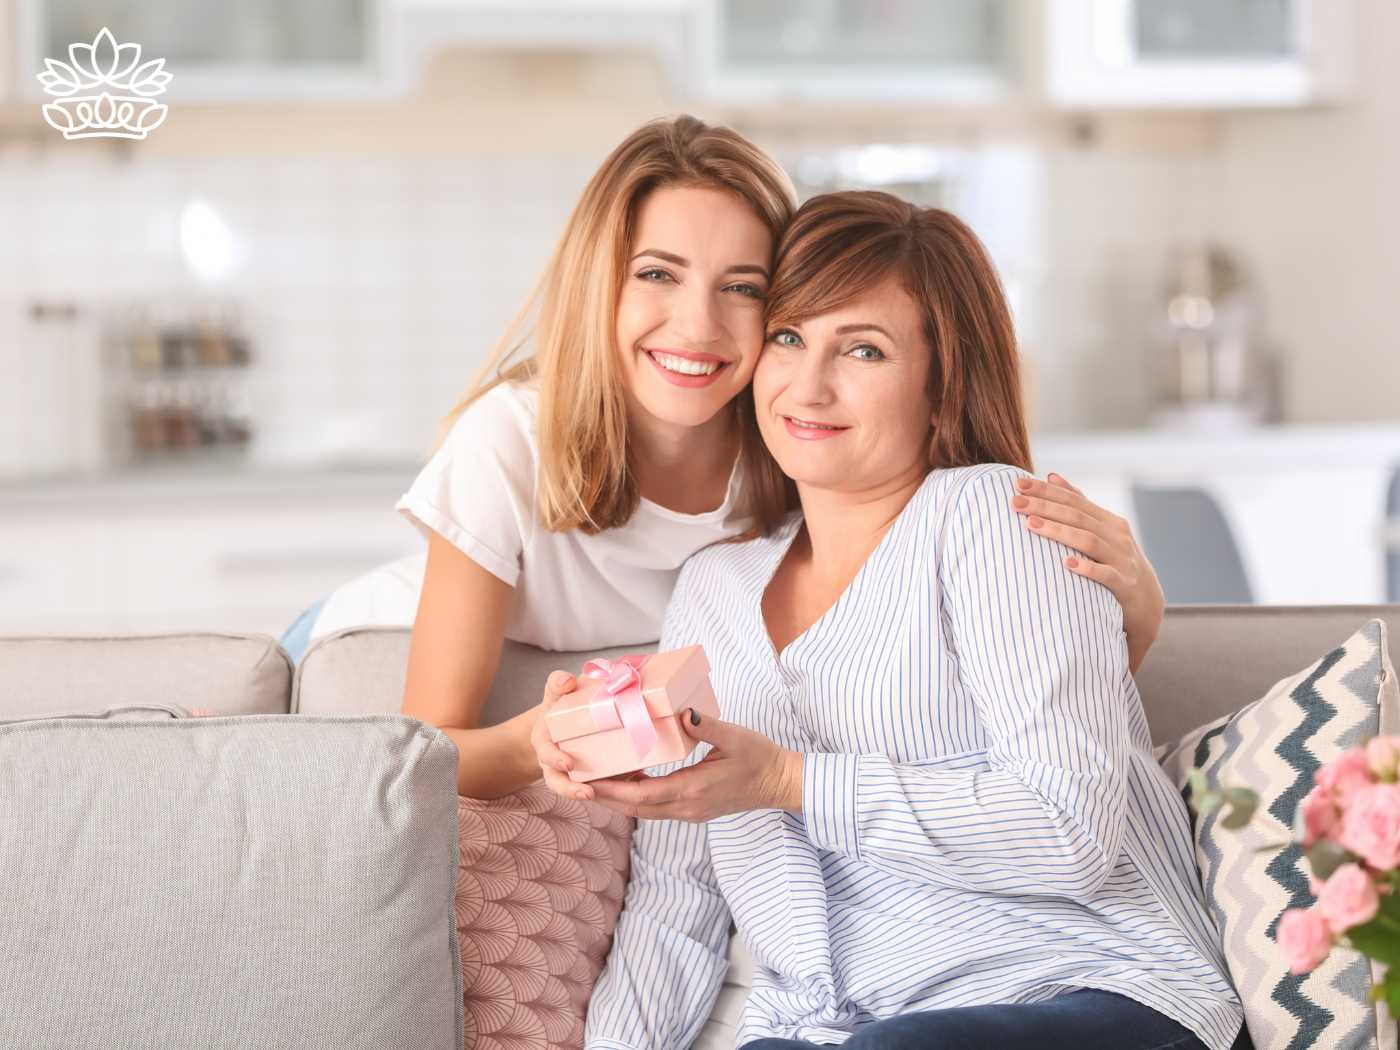 A smiling woman giving a pink gift box to another woman while sitting on a sofa, from the Gifts Under R500 Collection at Fabulous Flowers and Gifts, including keywords such as simple, women, advertisement, notebook, chat, and skin.